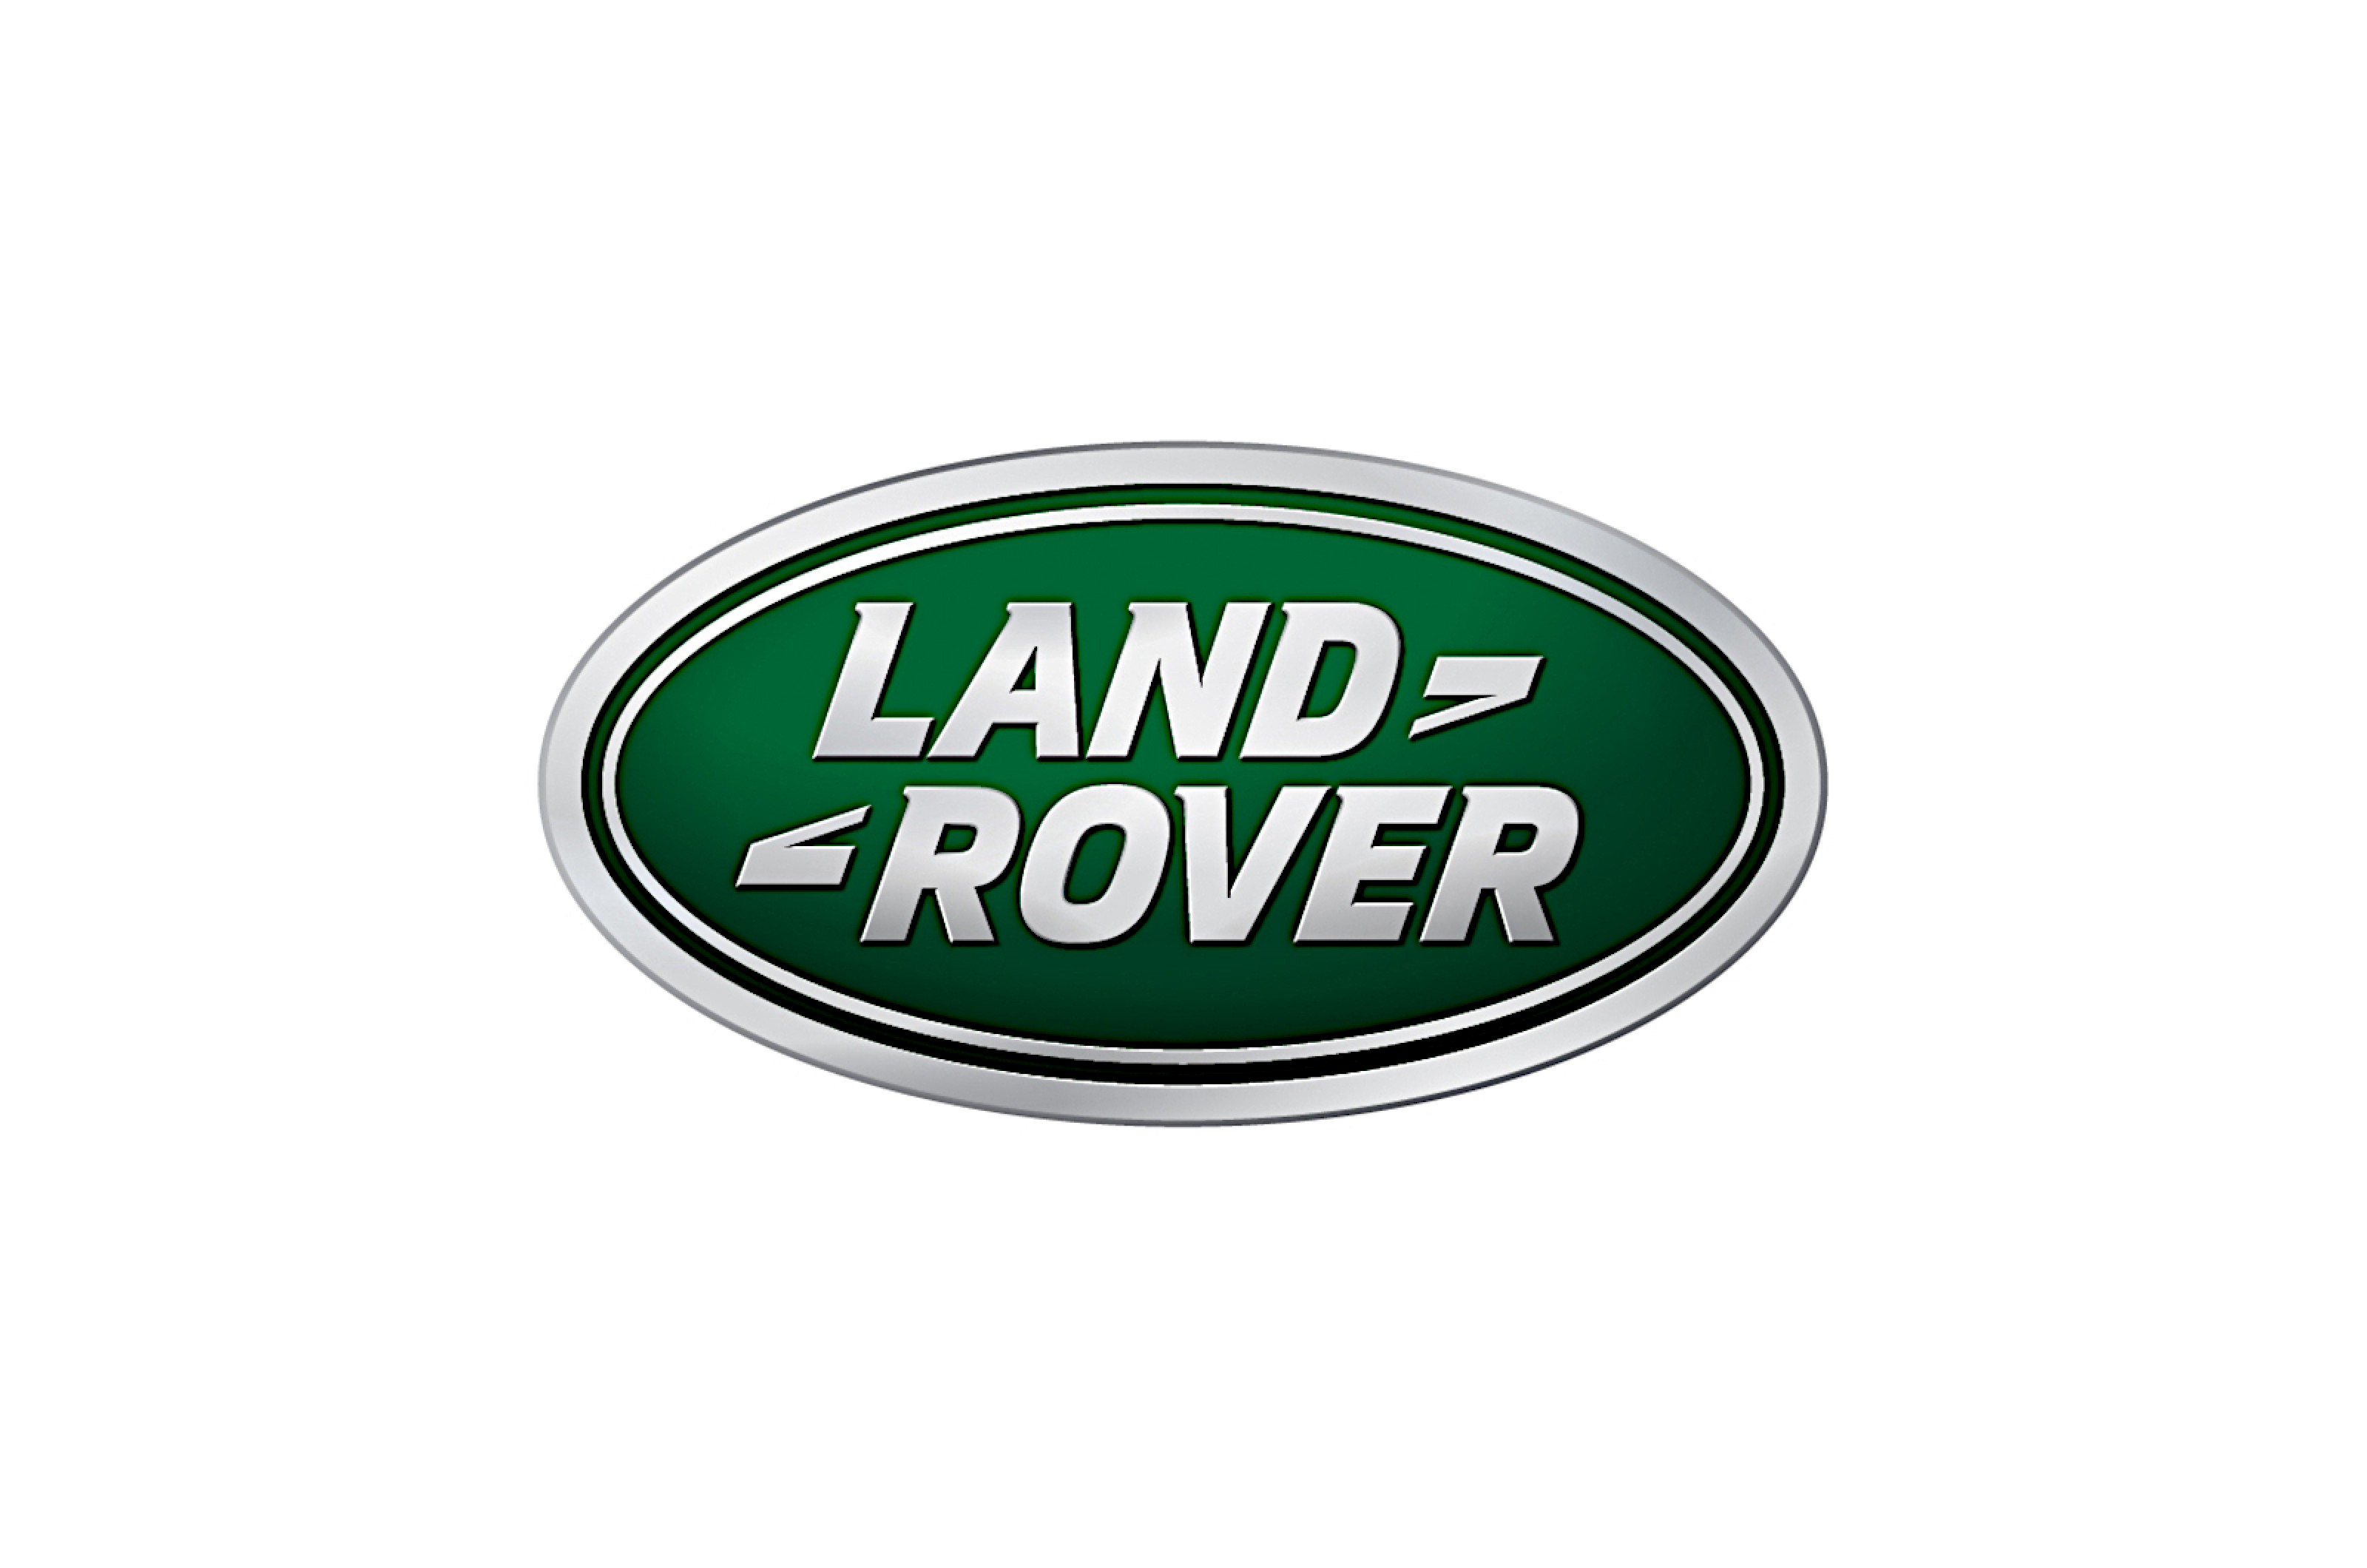 <p>For three decades, Land-Rover, as it was, was not a brand in its own right but simply a single model (or one of two from 1970, when the Range Rover was introduced) within the Rover range.</p>  <p>A workhorse vehicle which first appeared in immediate post-war Britain could not be expected to have an elaborate logo, and sure enough the one on the Land-Rover was very simple.</p>  <p>It consisted of the words Land (top left) and Rover (bottom right) displayed in an oval and joined together by a large, Z-shaped hyphen.</p>  <p>Even the separation of Land-Rover from Rover in 1978 made little difference, and in fact the logo has not changed much even up to the present day. The lettering, the colors and the shape of the oval have all been developed, but the current design is still very similar to the one first seen three-quarters of a century ago.</p>